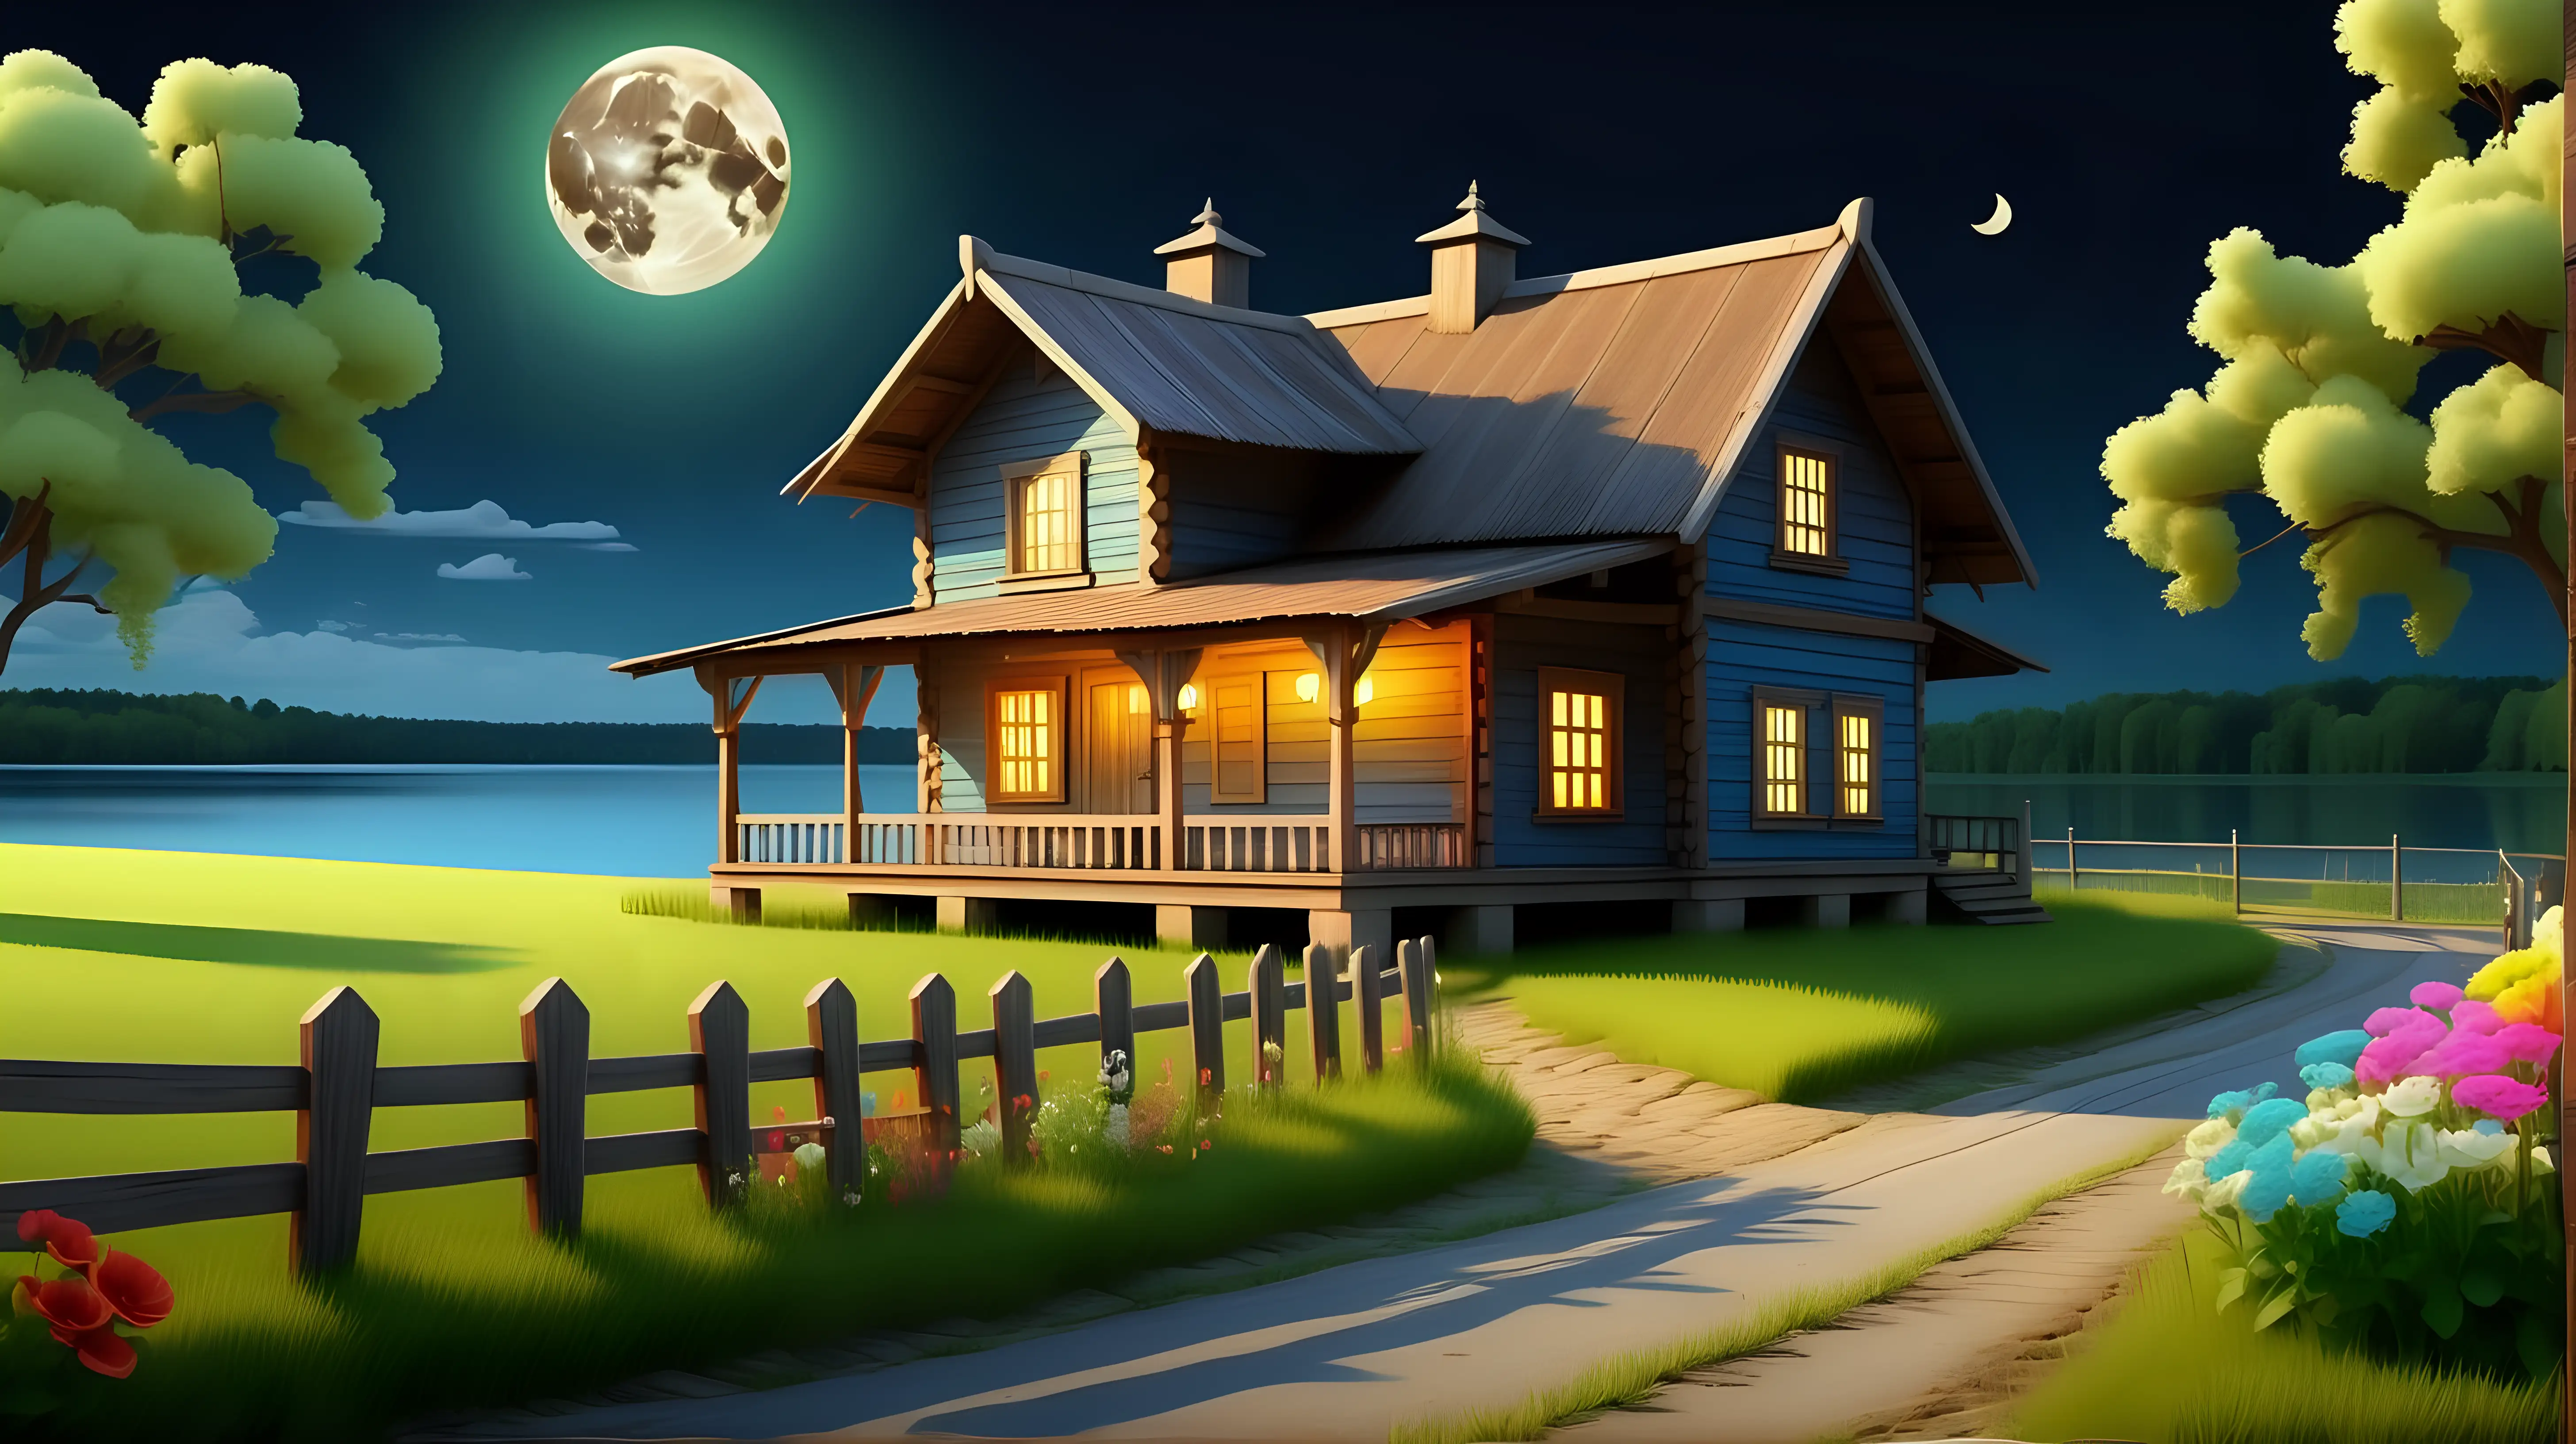 Rustic Lakeside Cottage on a Moonlit Night